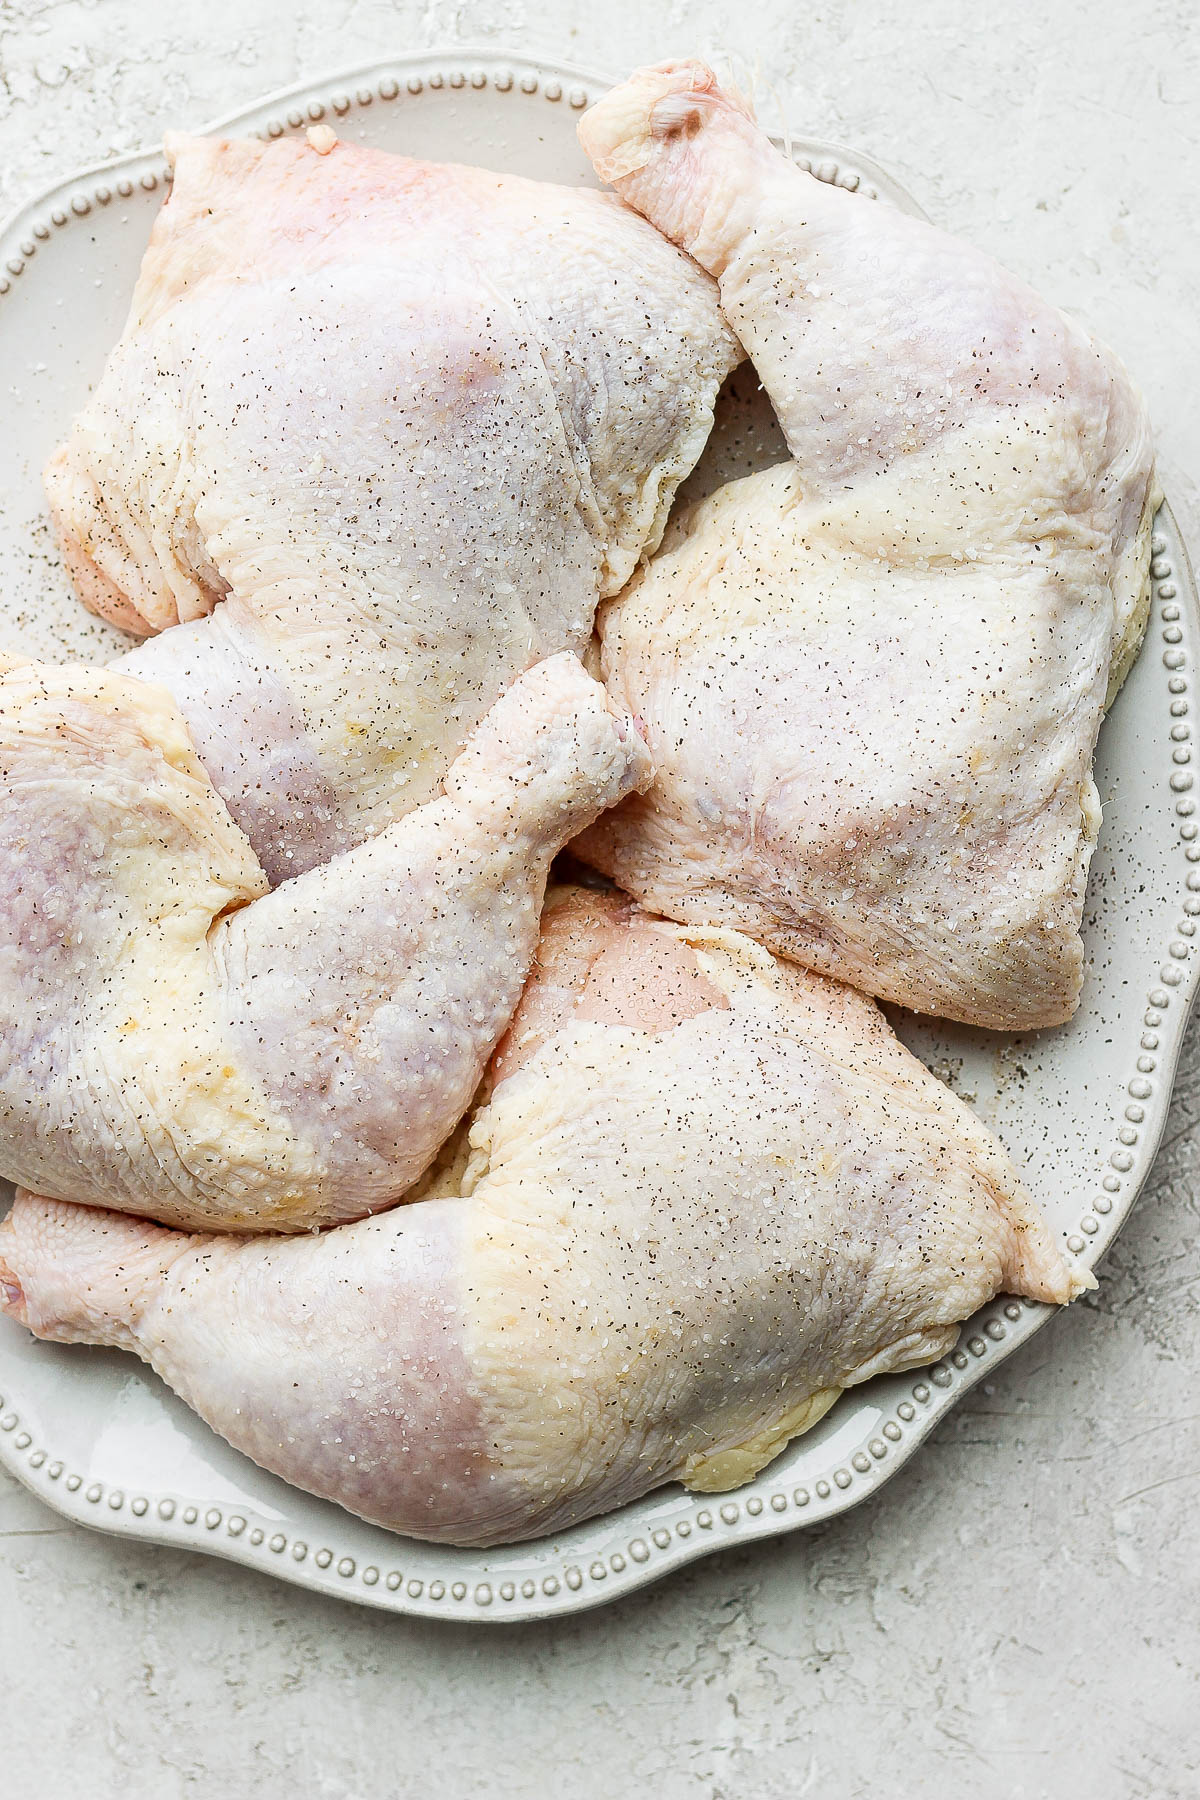 Raw chicken quarters on a plate that have been seasoned with salt and pepper.